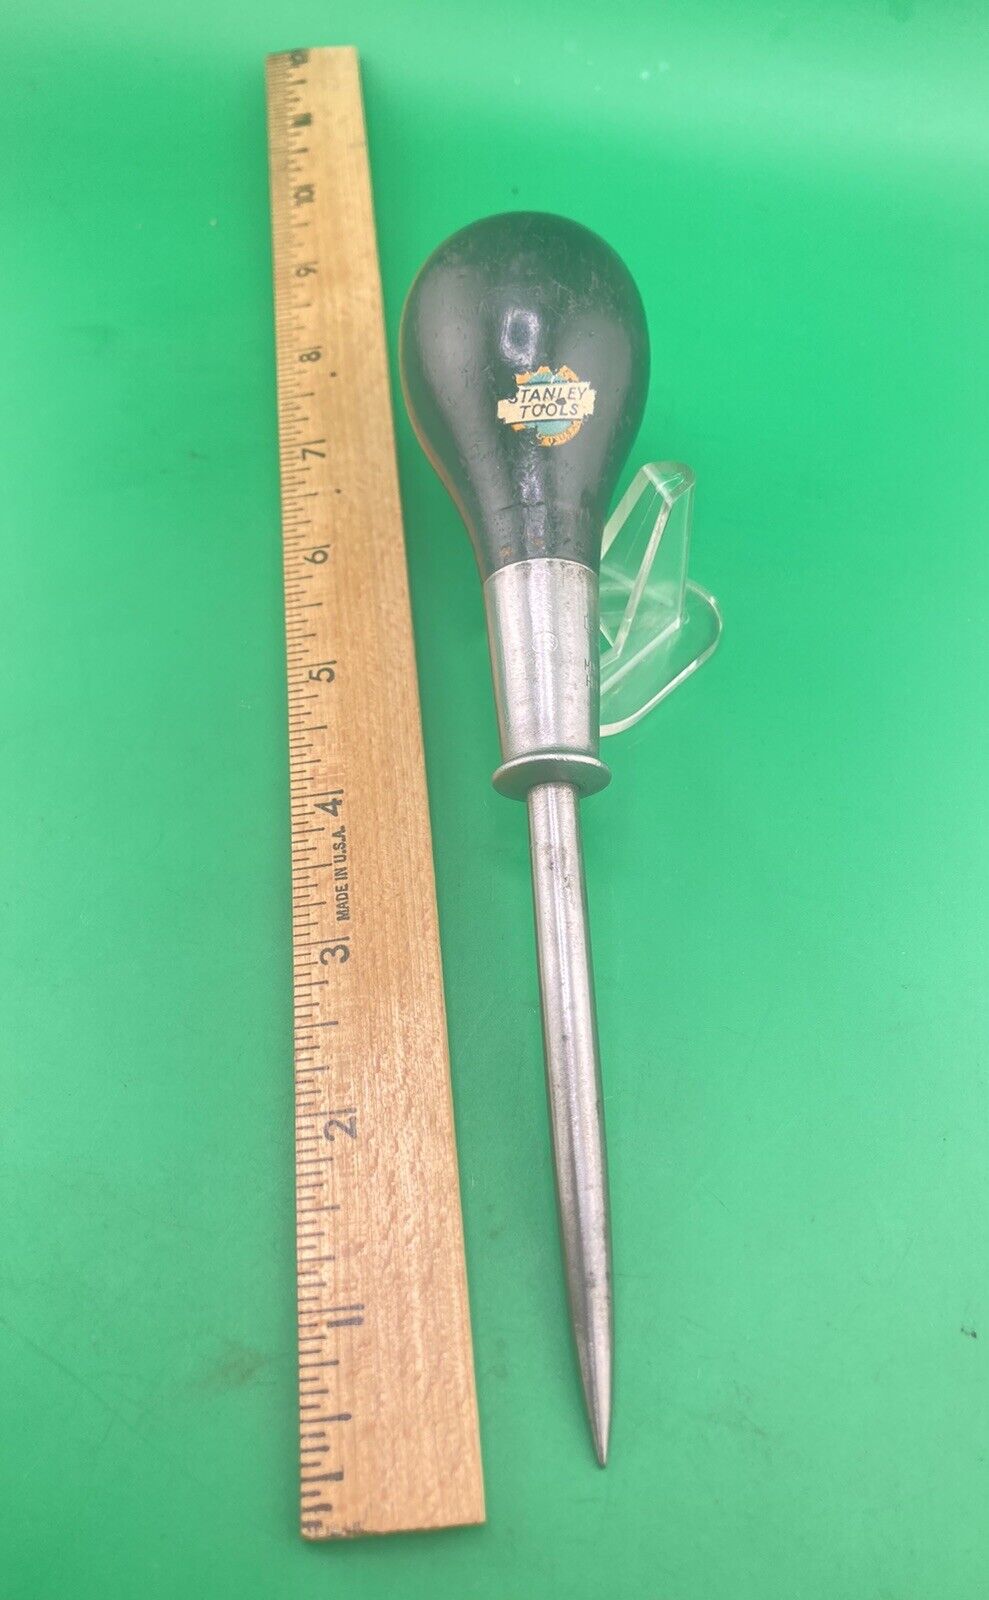 Vintage Stanley Tools SW Sweetheart Hurwood Large Scratch Awl Nice Condition USA